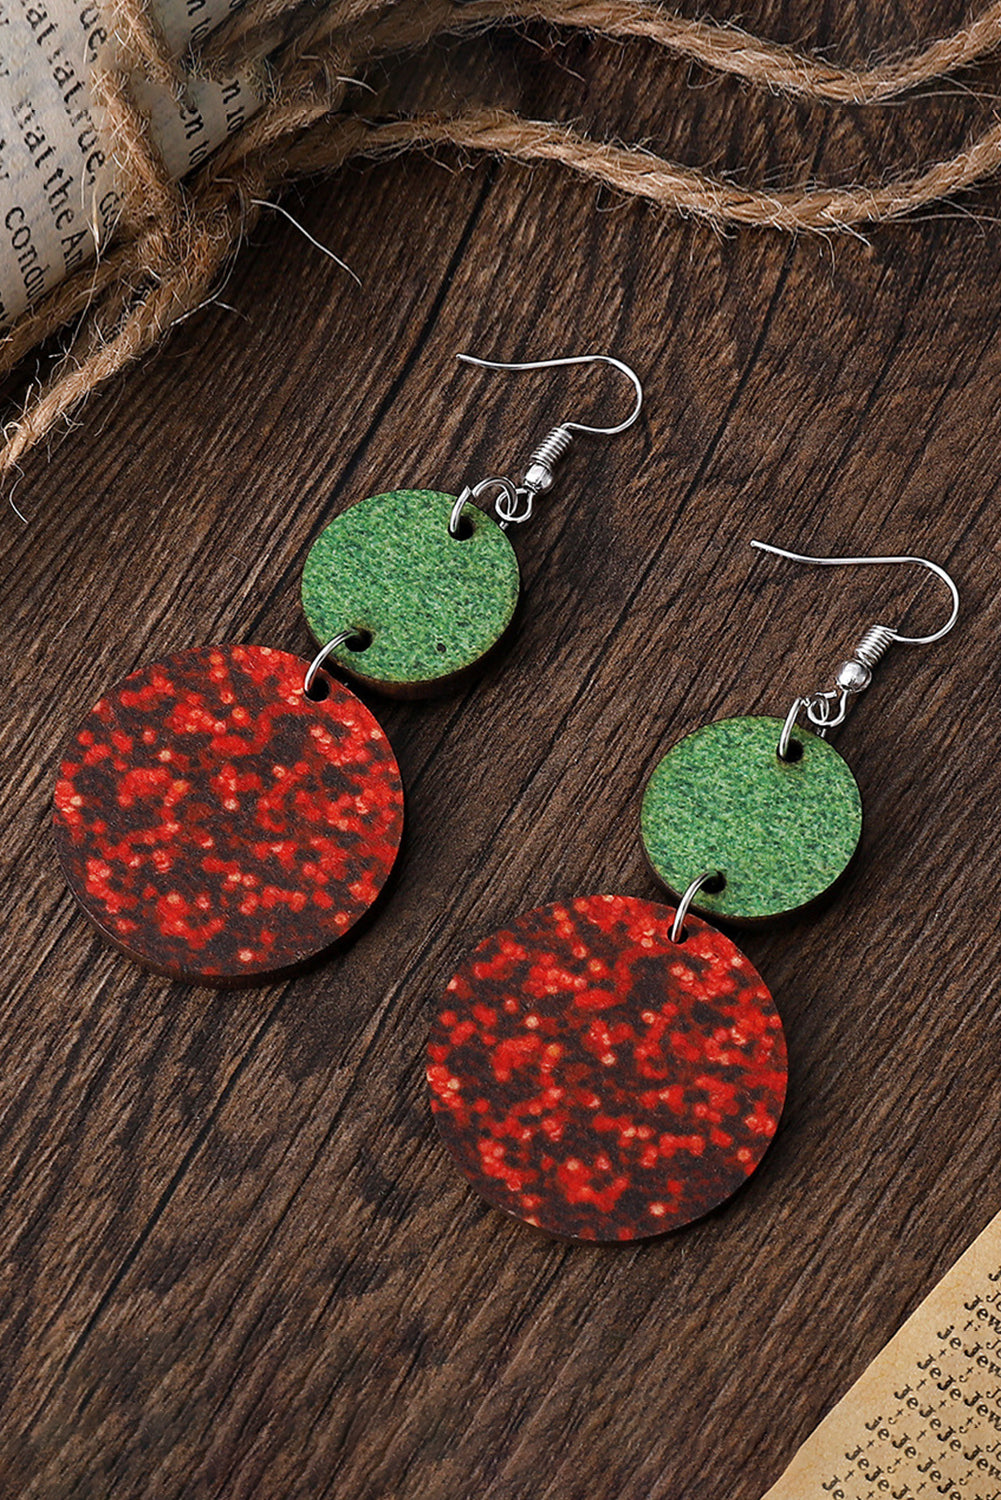 Fiery Red Sequin Round Décor Drop Earrings Jewelry JT's Designer Fashion